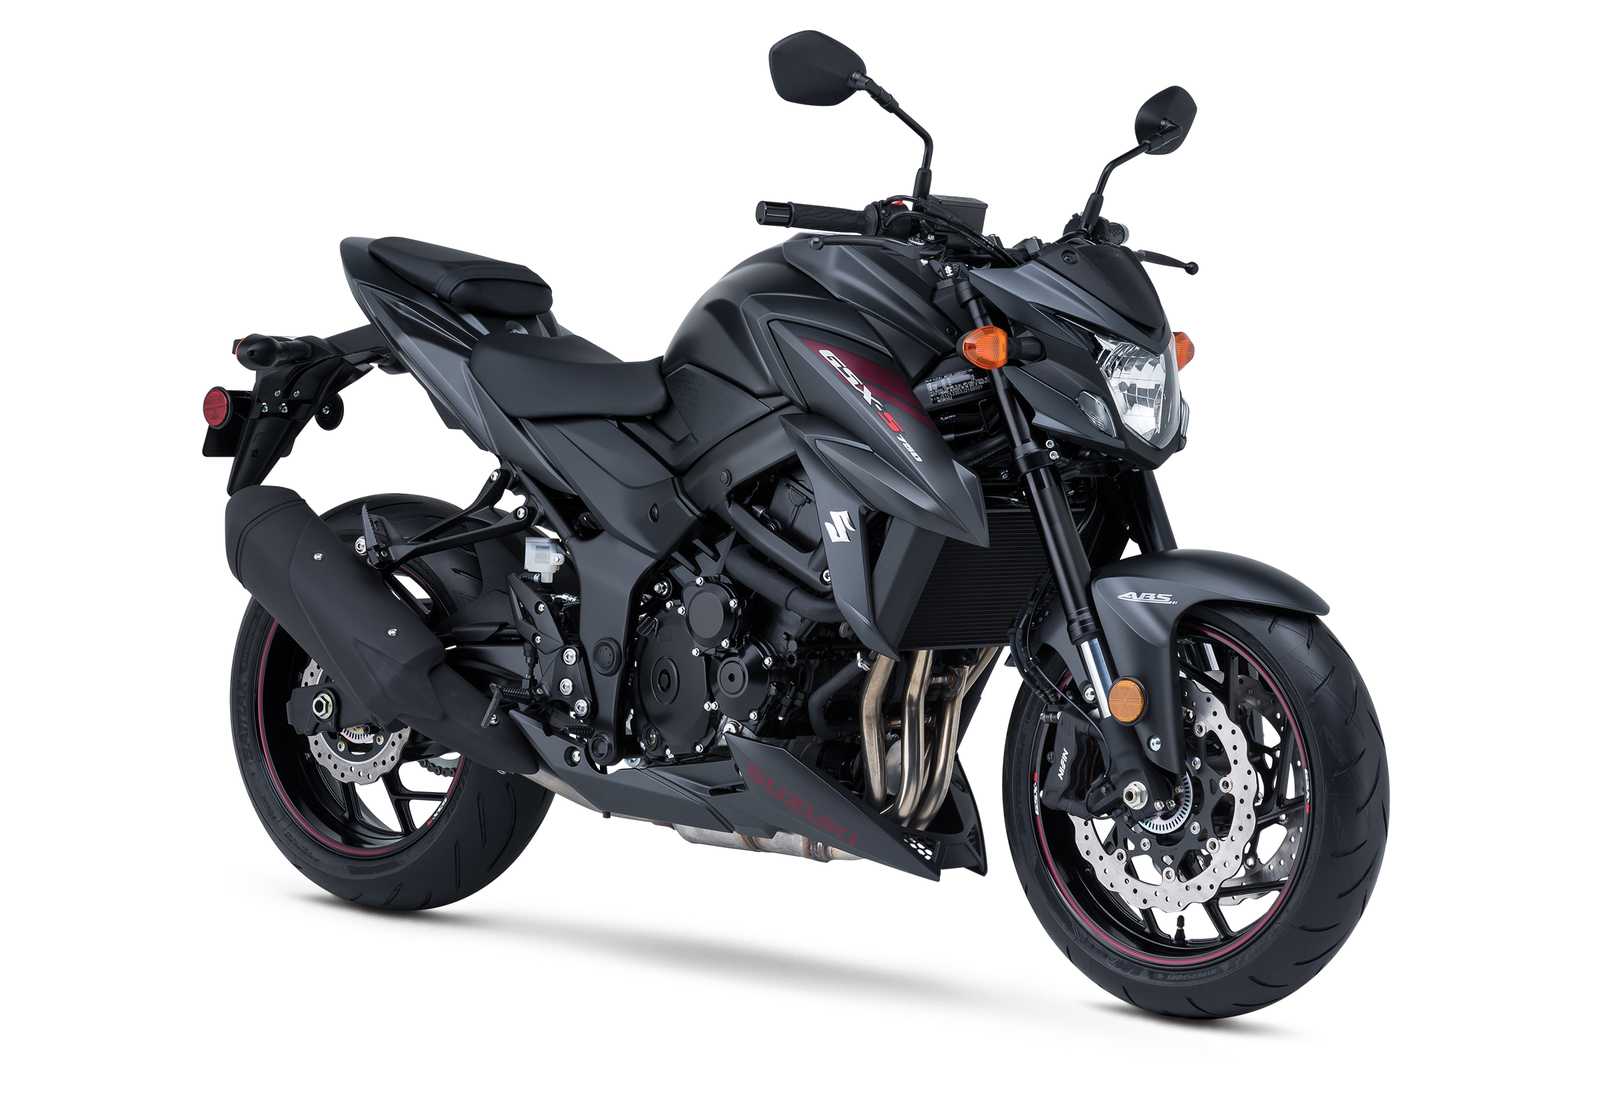 Suzuki Introduces New Gsx S750 With More Power And 50 State Emission Homologation Updated Roadracing World Magazine Motorcycle Riding Racing Tech News